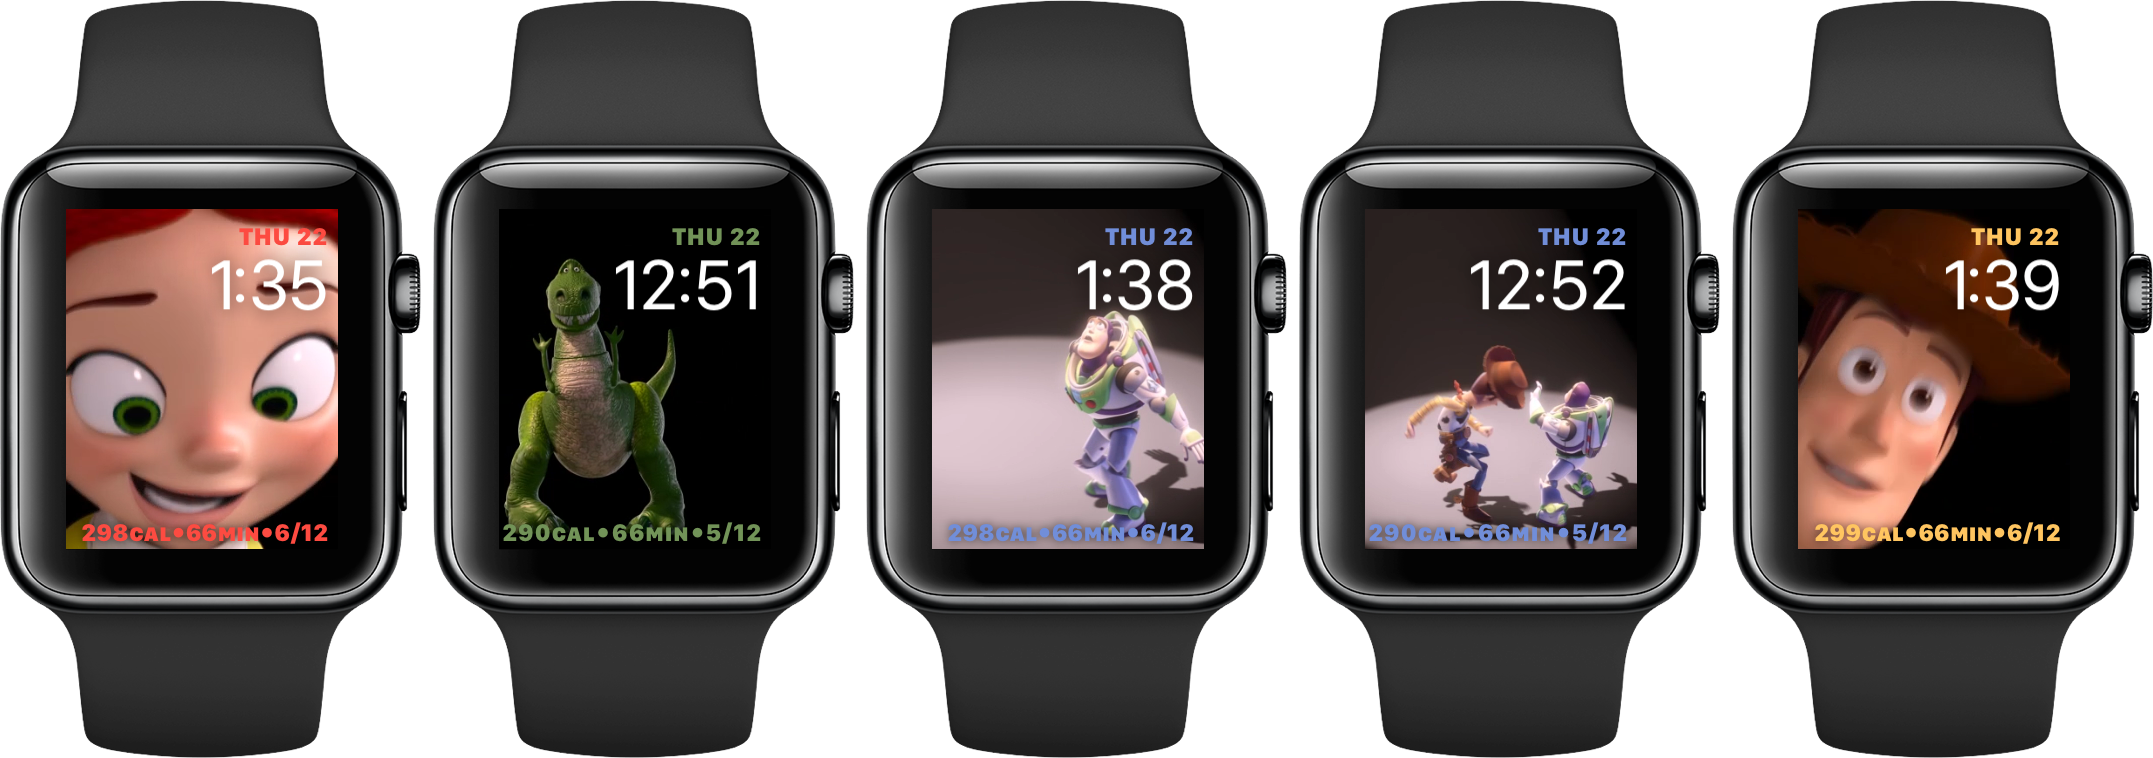 Apple Releases watchOS 4, so get to Downloading